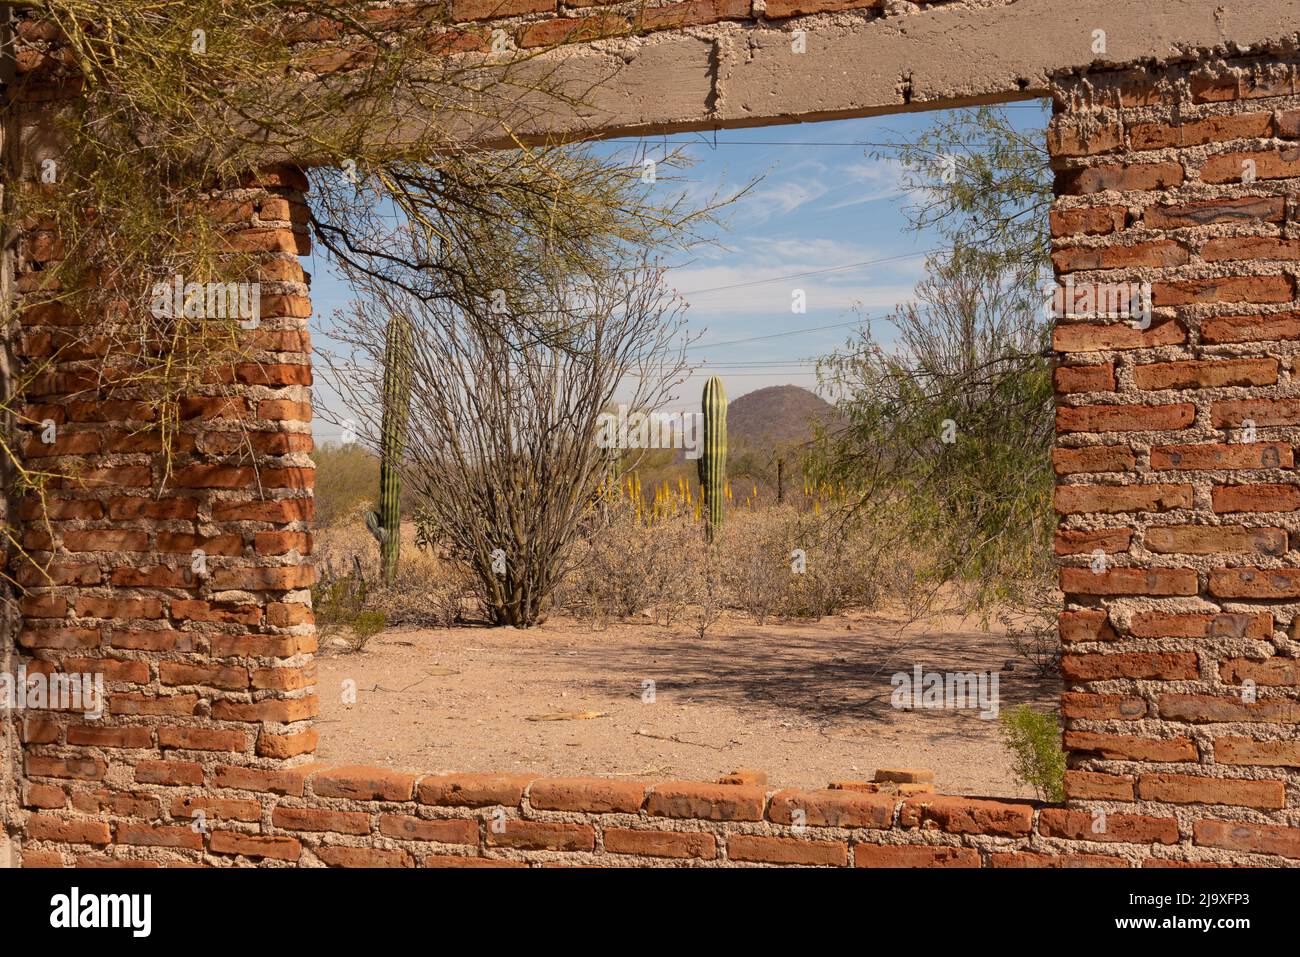 Looking through an open window in an abandoned house onto the arid Sonoran Desert in Northern Mexico. Outside the window are cardon cacti Stock Photo